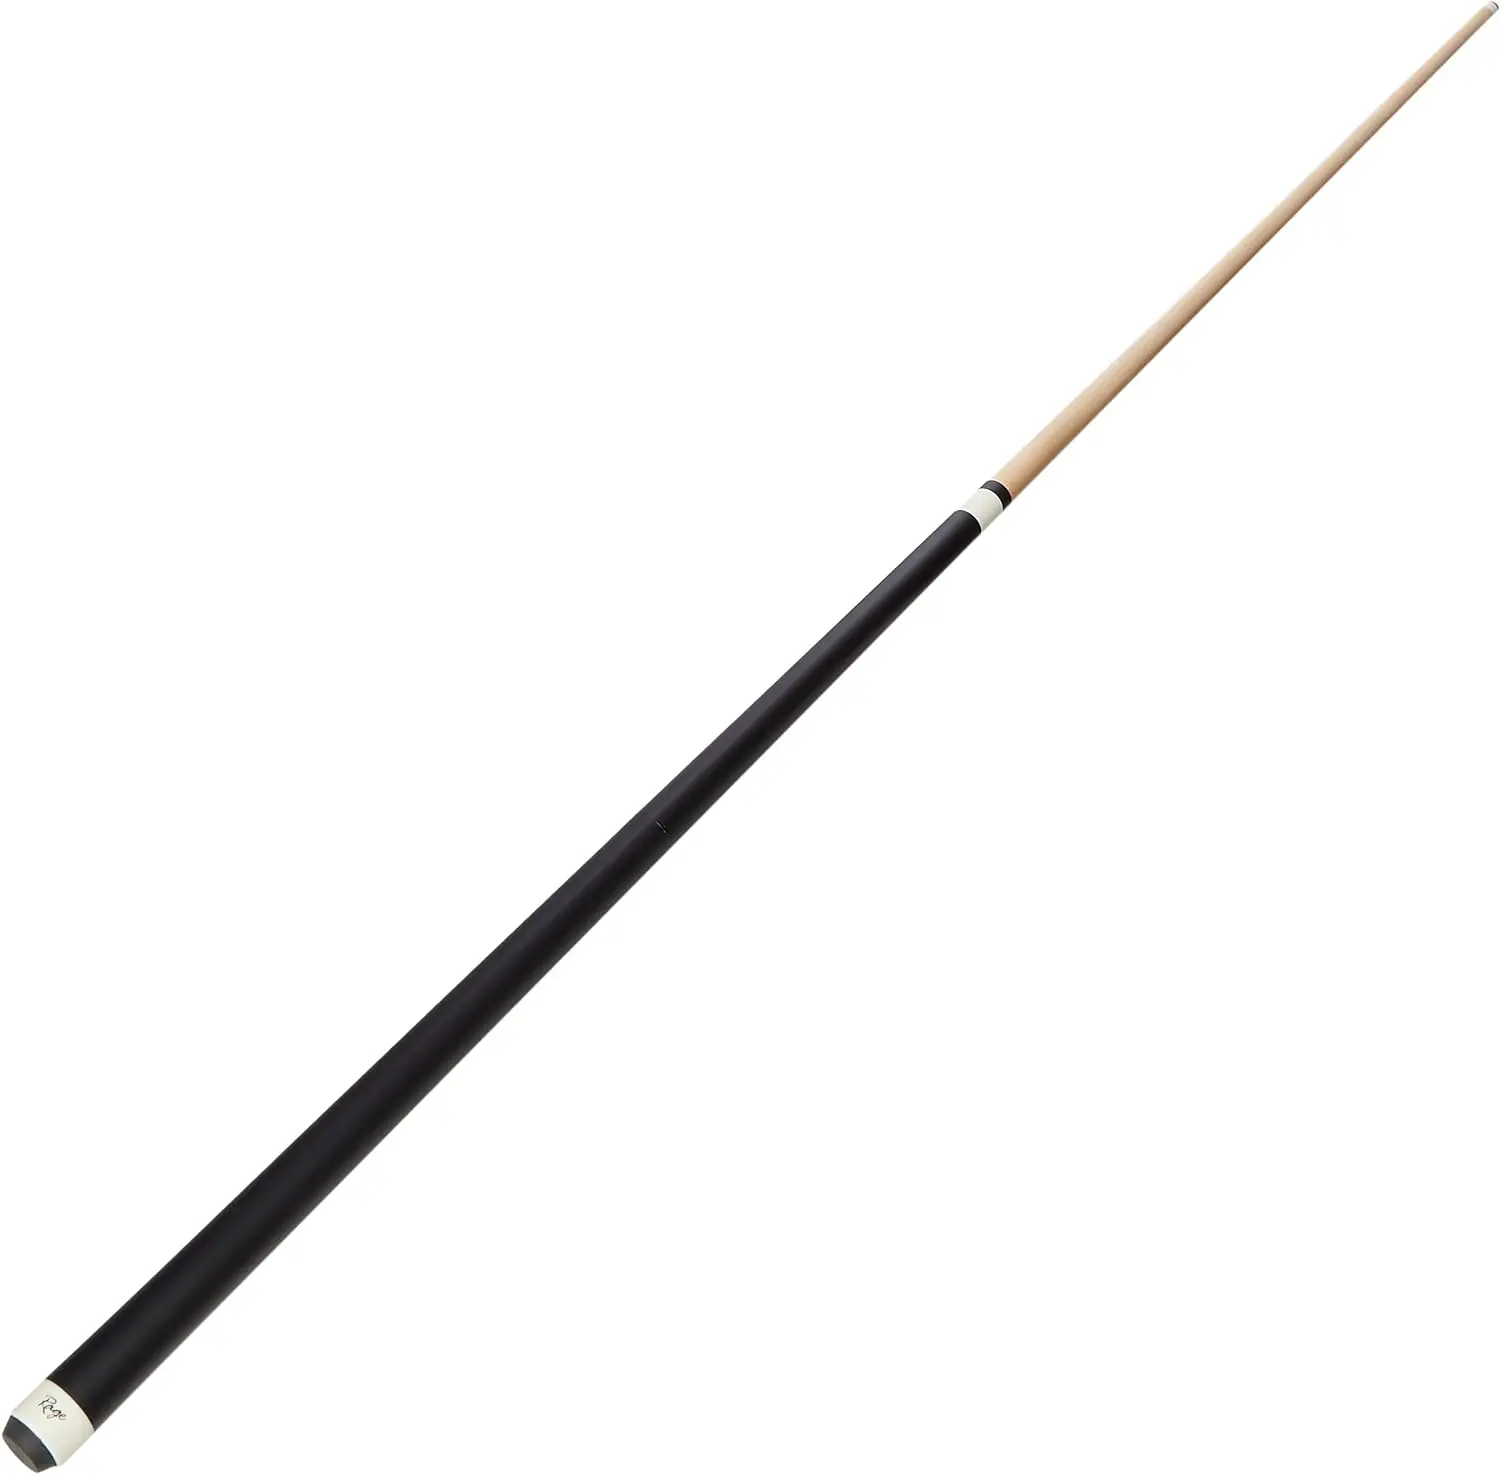 

RGHHBK 100-Percent Maple Heavy Hitter Break Cue with Double Wraps/Joints, 25-Ounce Scuffers Pool cue mm soft tip Chalk Chalk hol